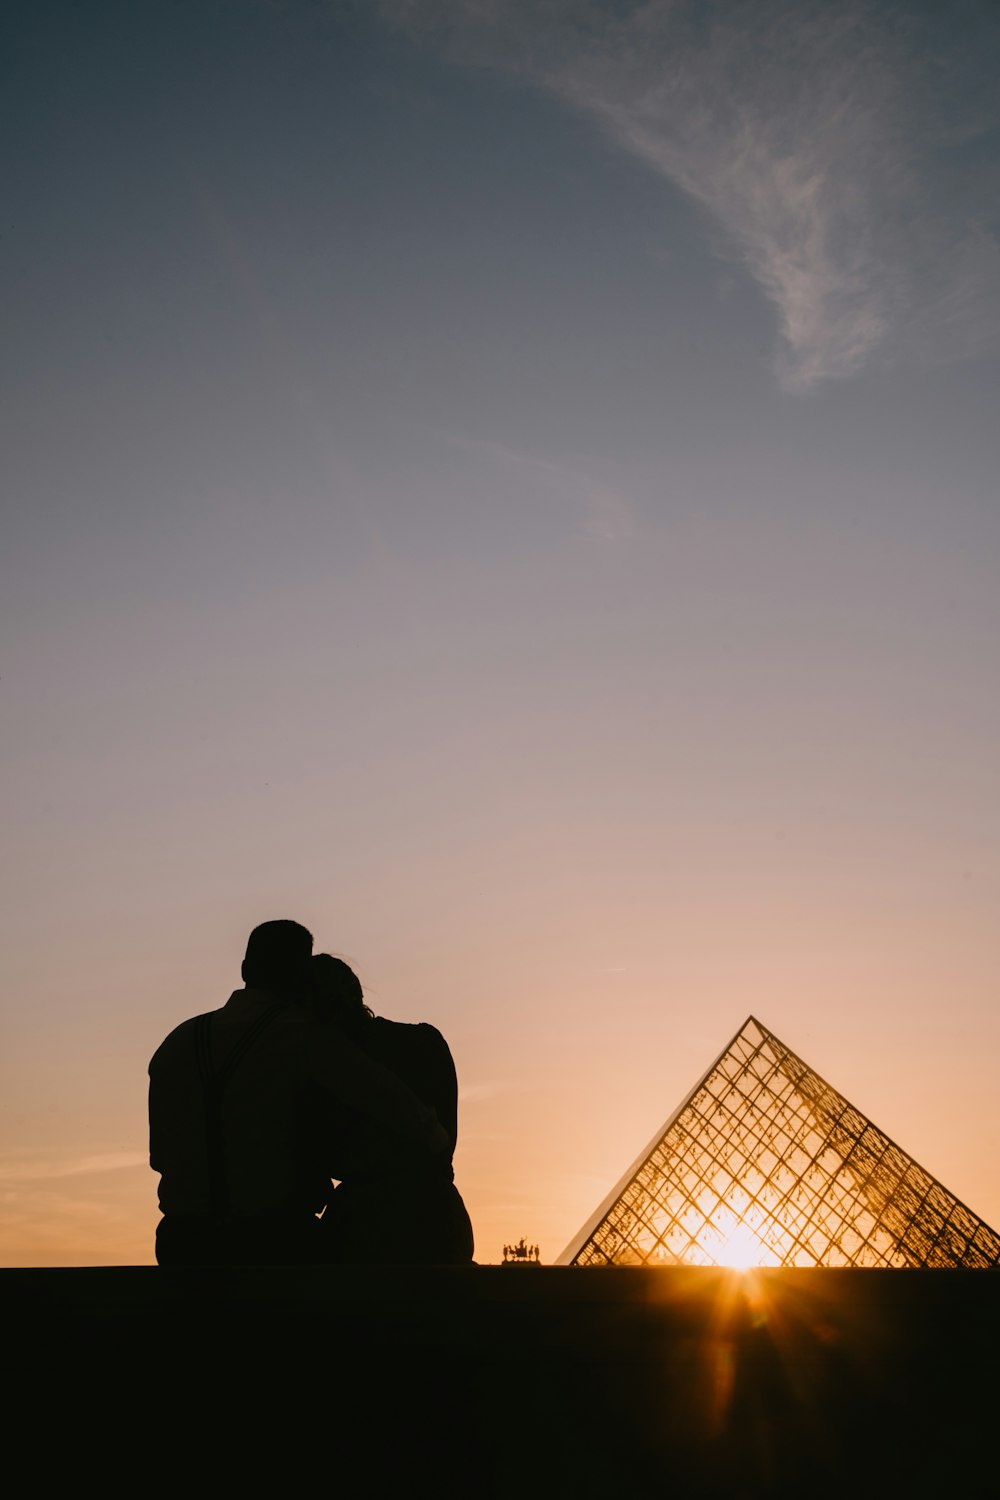 silhouette of man and woman standing near building during daytime